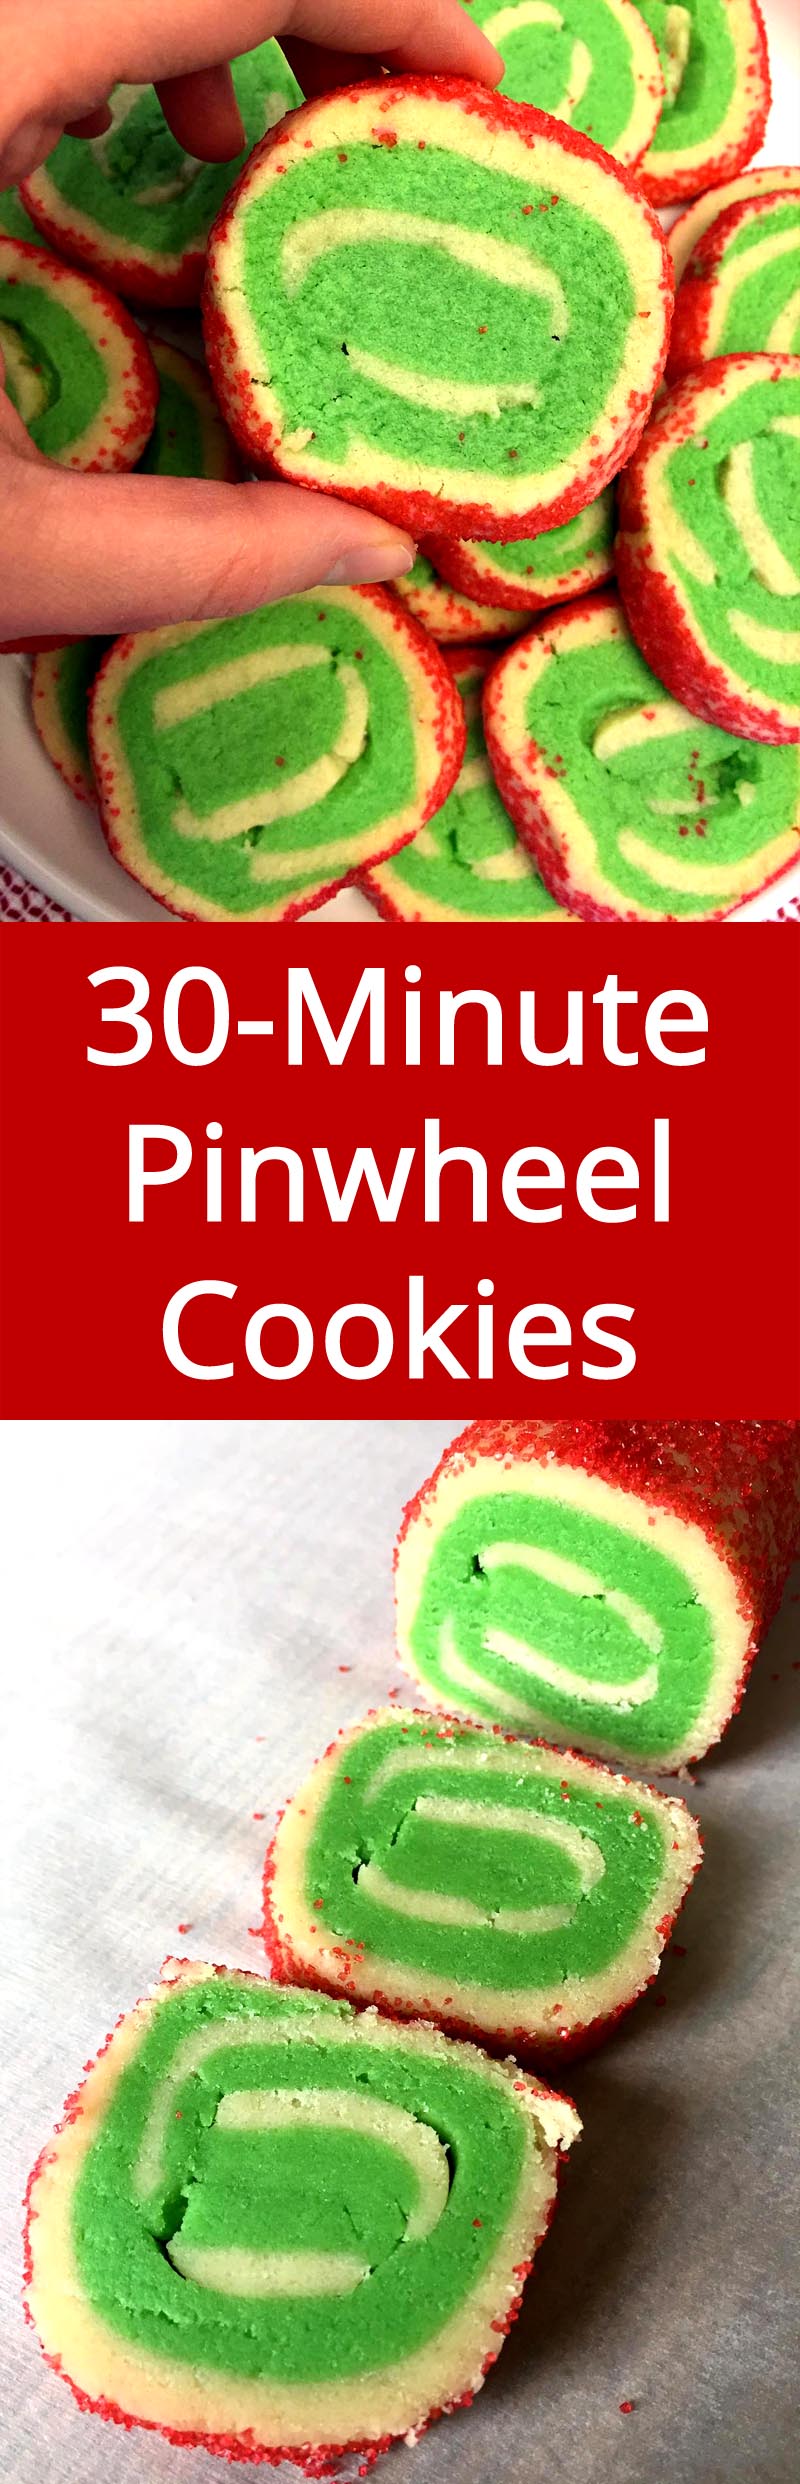 No need to chill the dough! I'm trying this ASAP! Love pinwheel cookies!| MelanieCooks.com